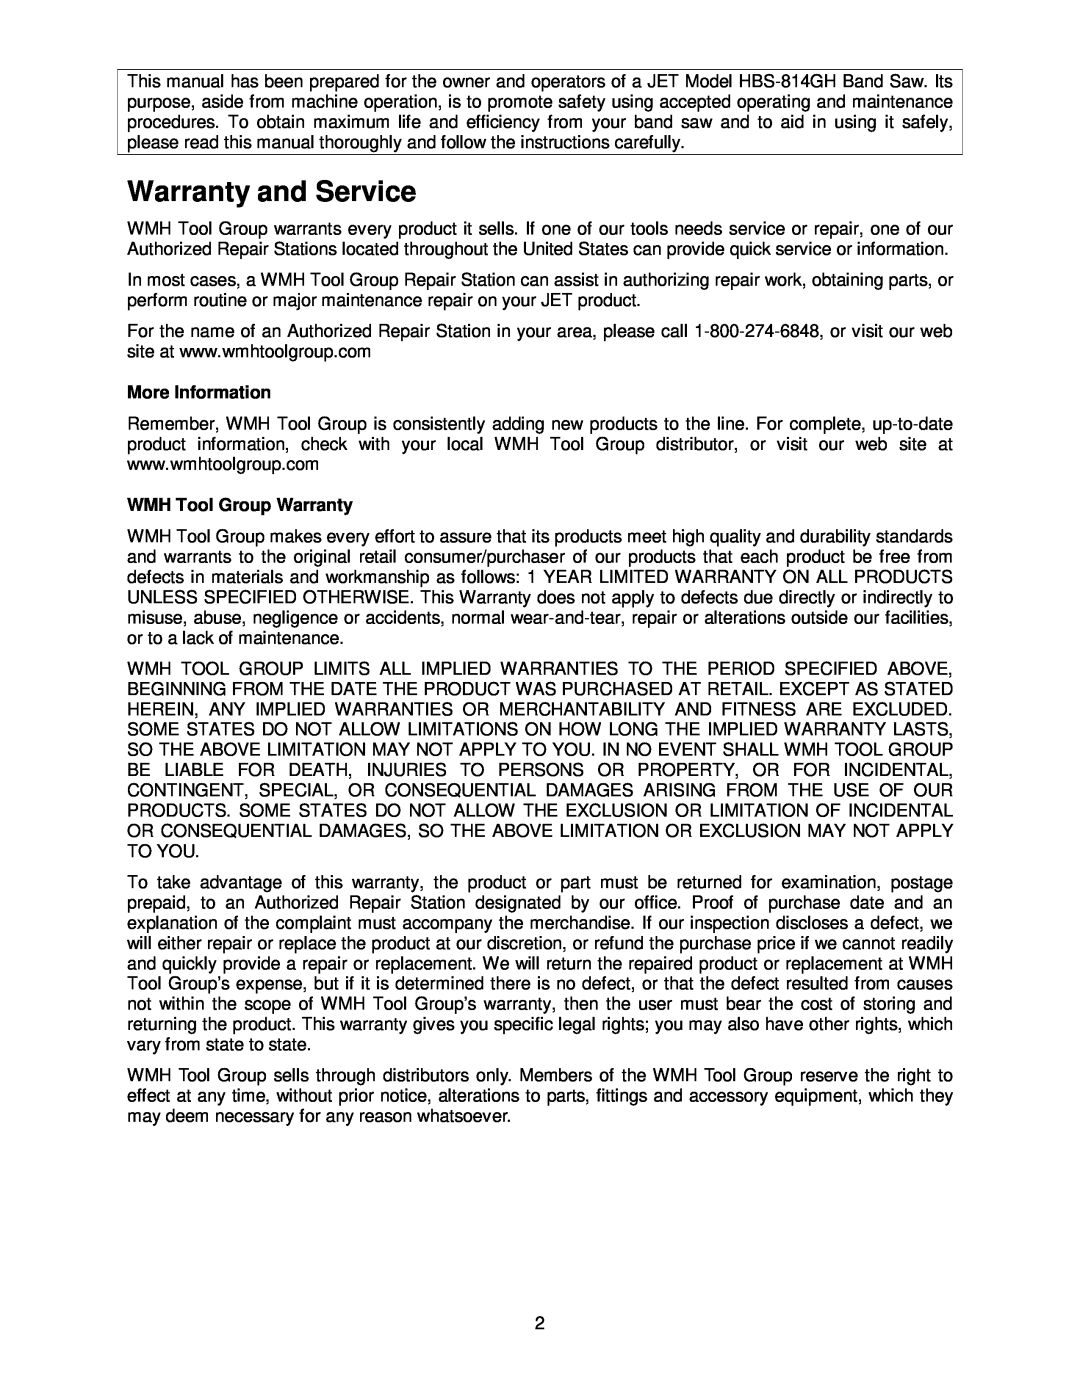 Jet Tools HBS-814GH operating instructions Warranty and Service, More Information, WMH Tool Group Warranty 